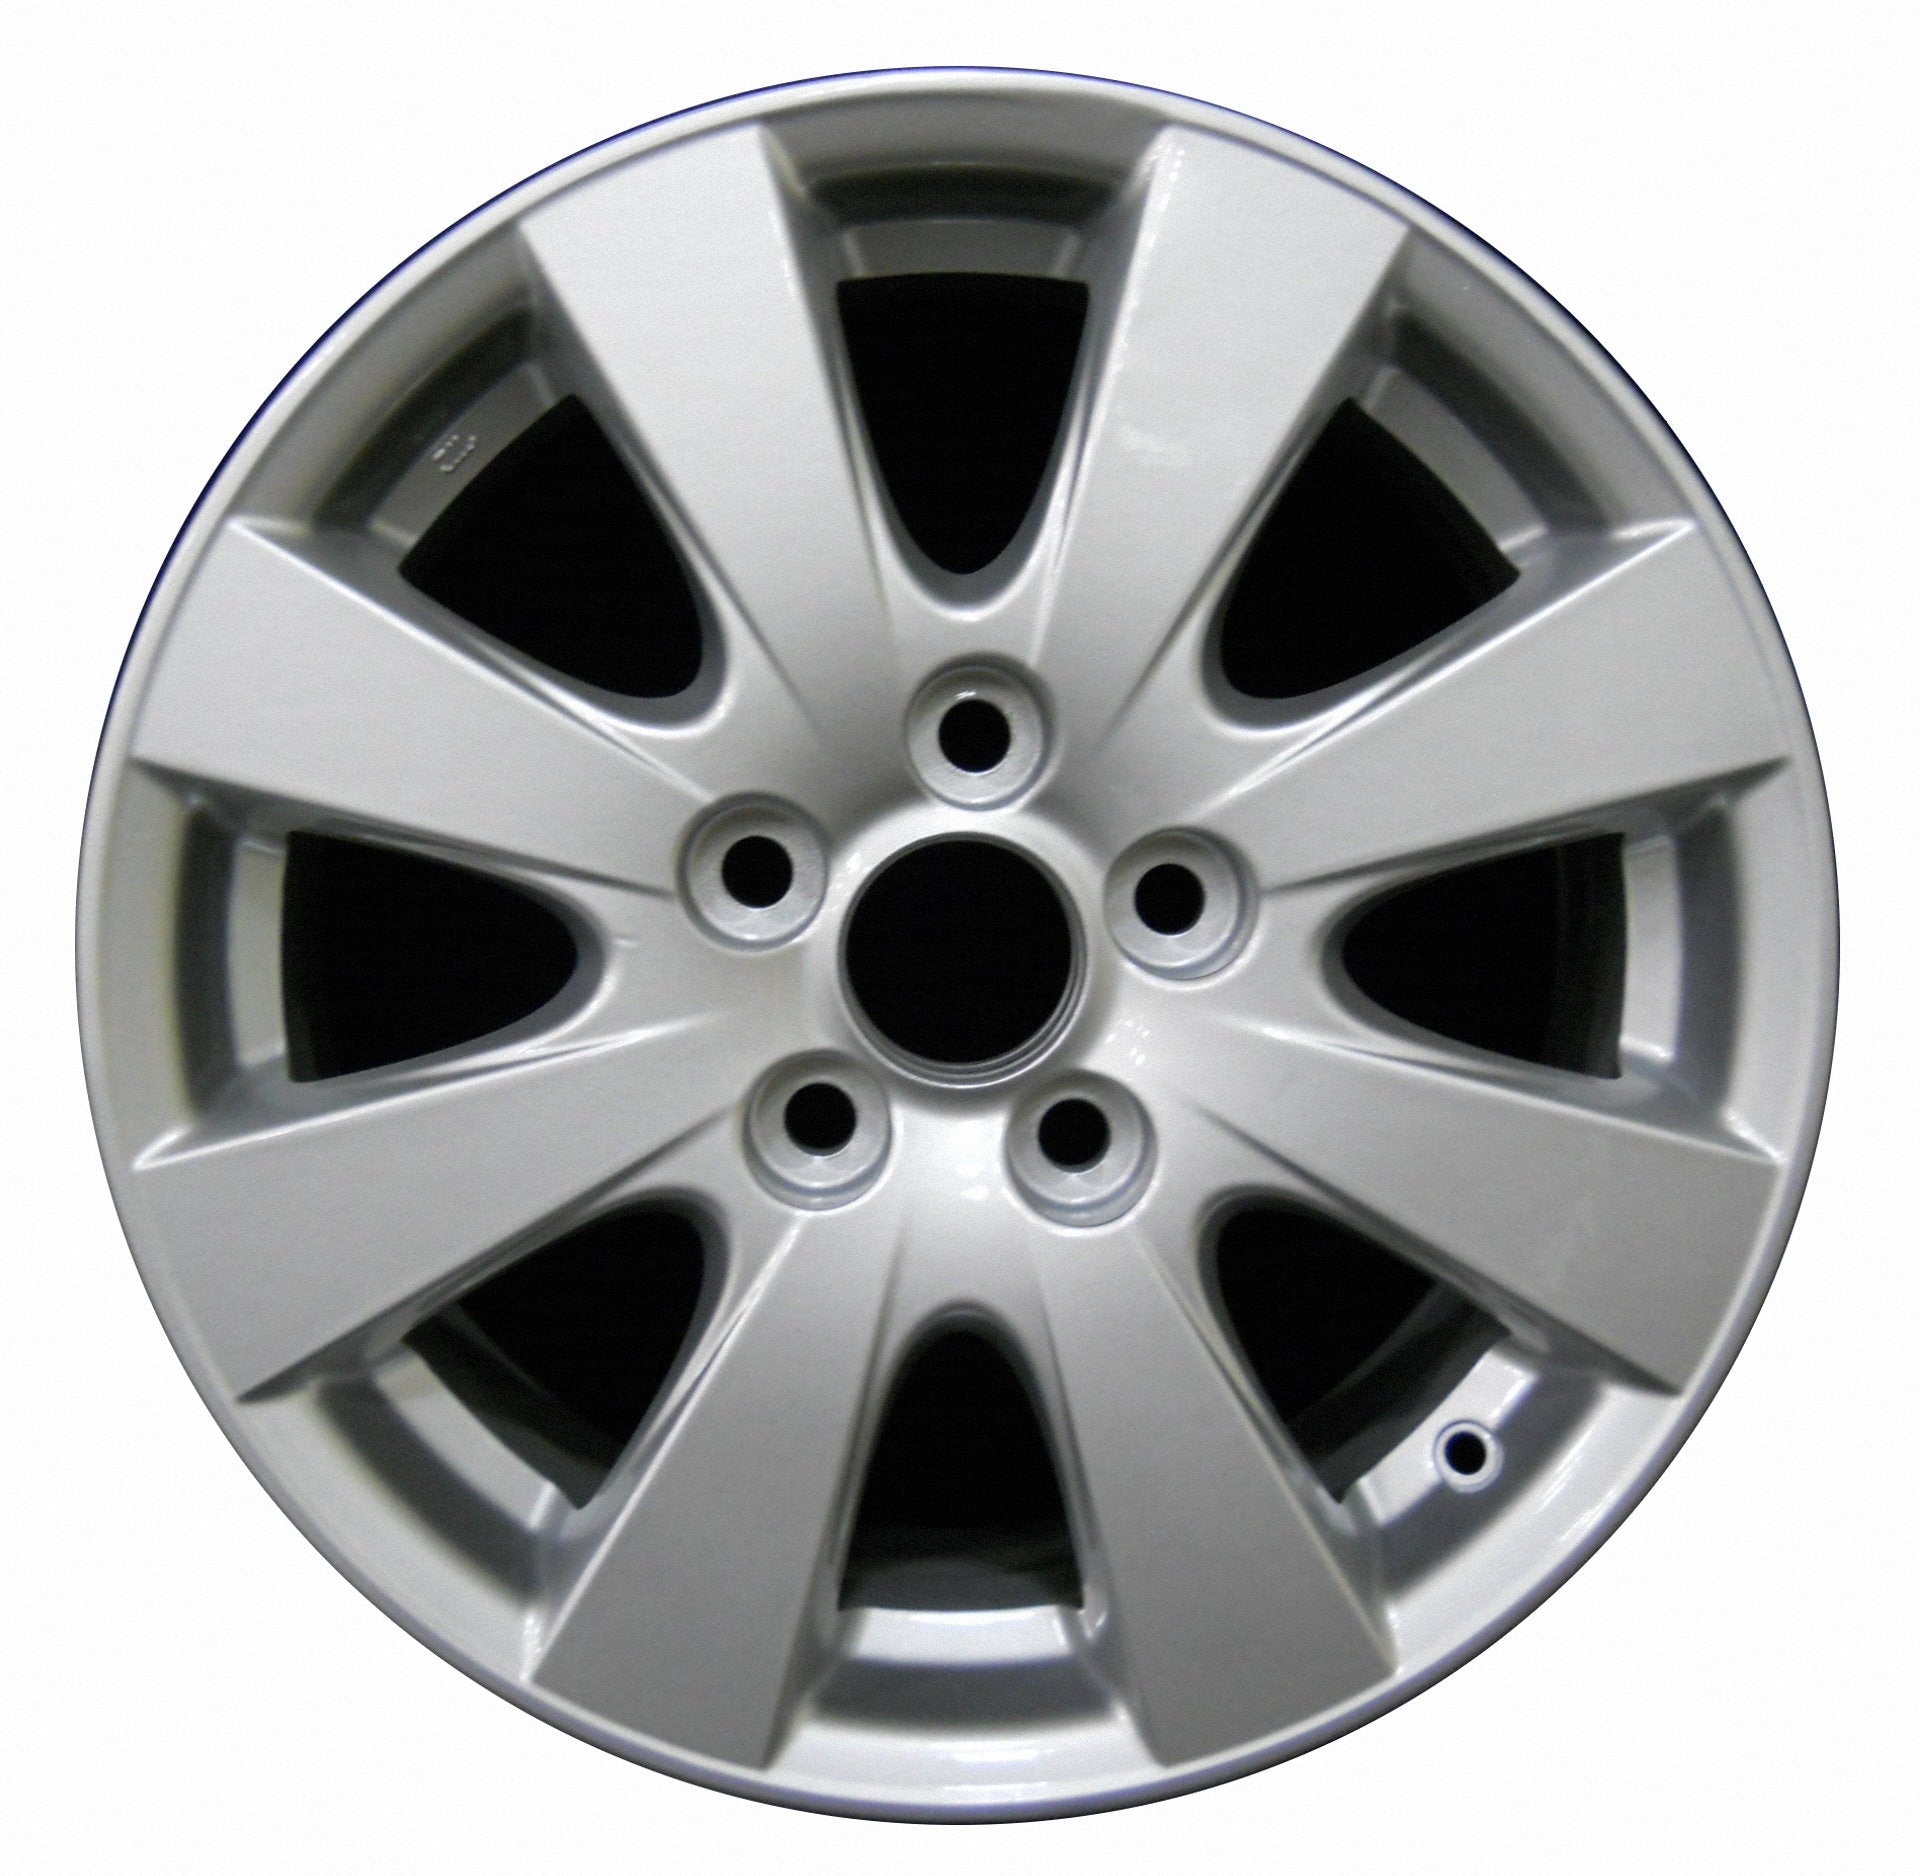 Toyota Camry  2006, 2007, 2008, 2009, 2010, 2011 Factory OEM Car Wheel Size 16x6.5 Alloy WAO.69496.LS03.FF